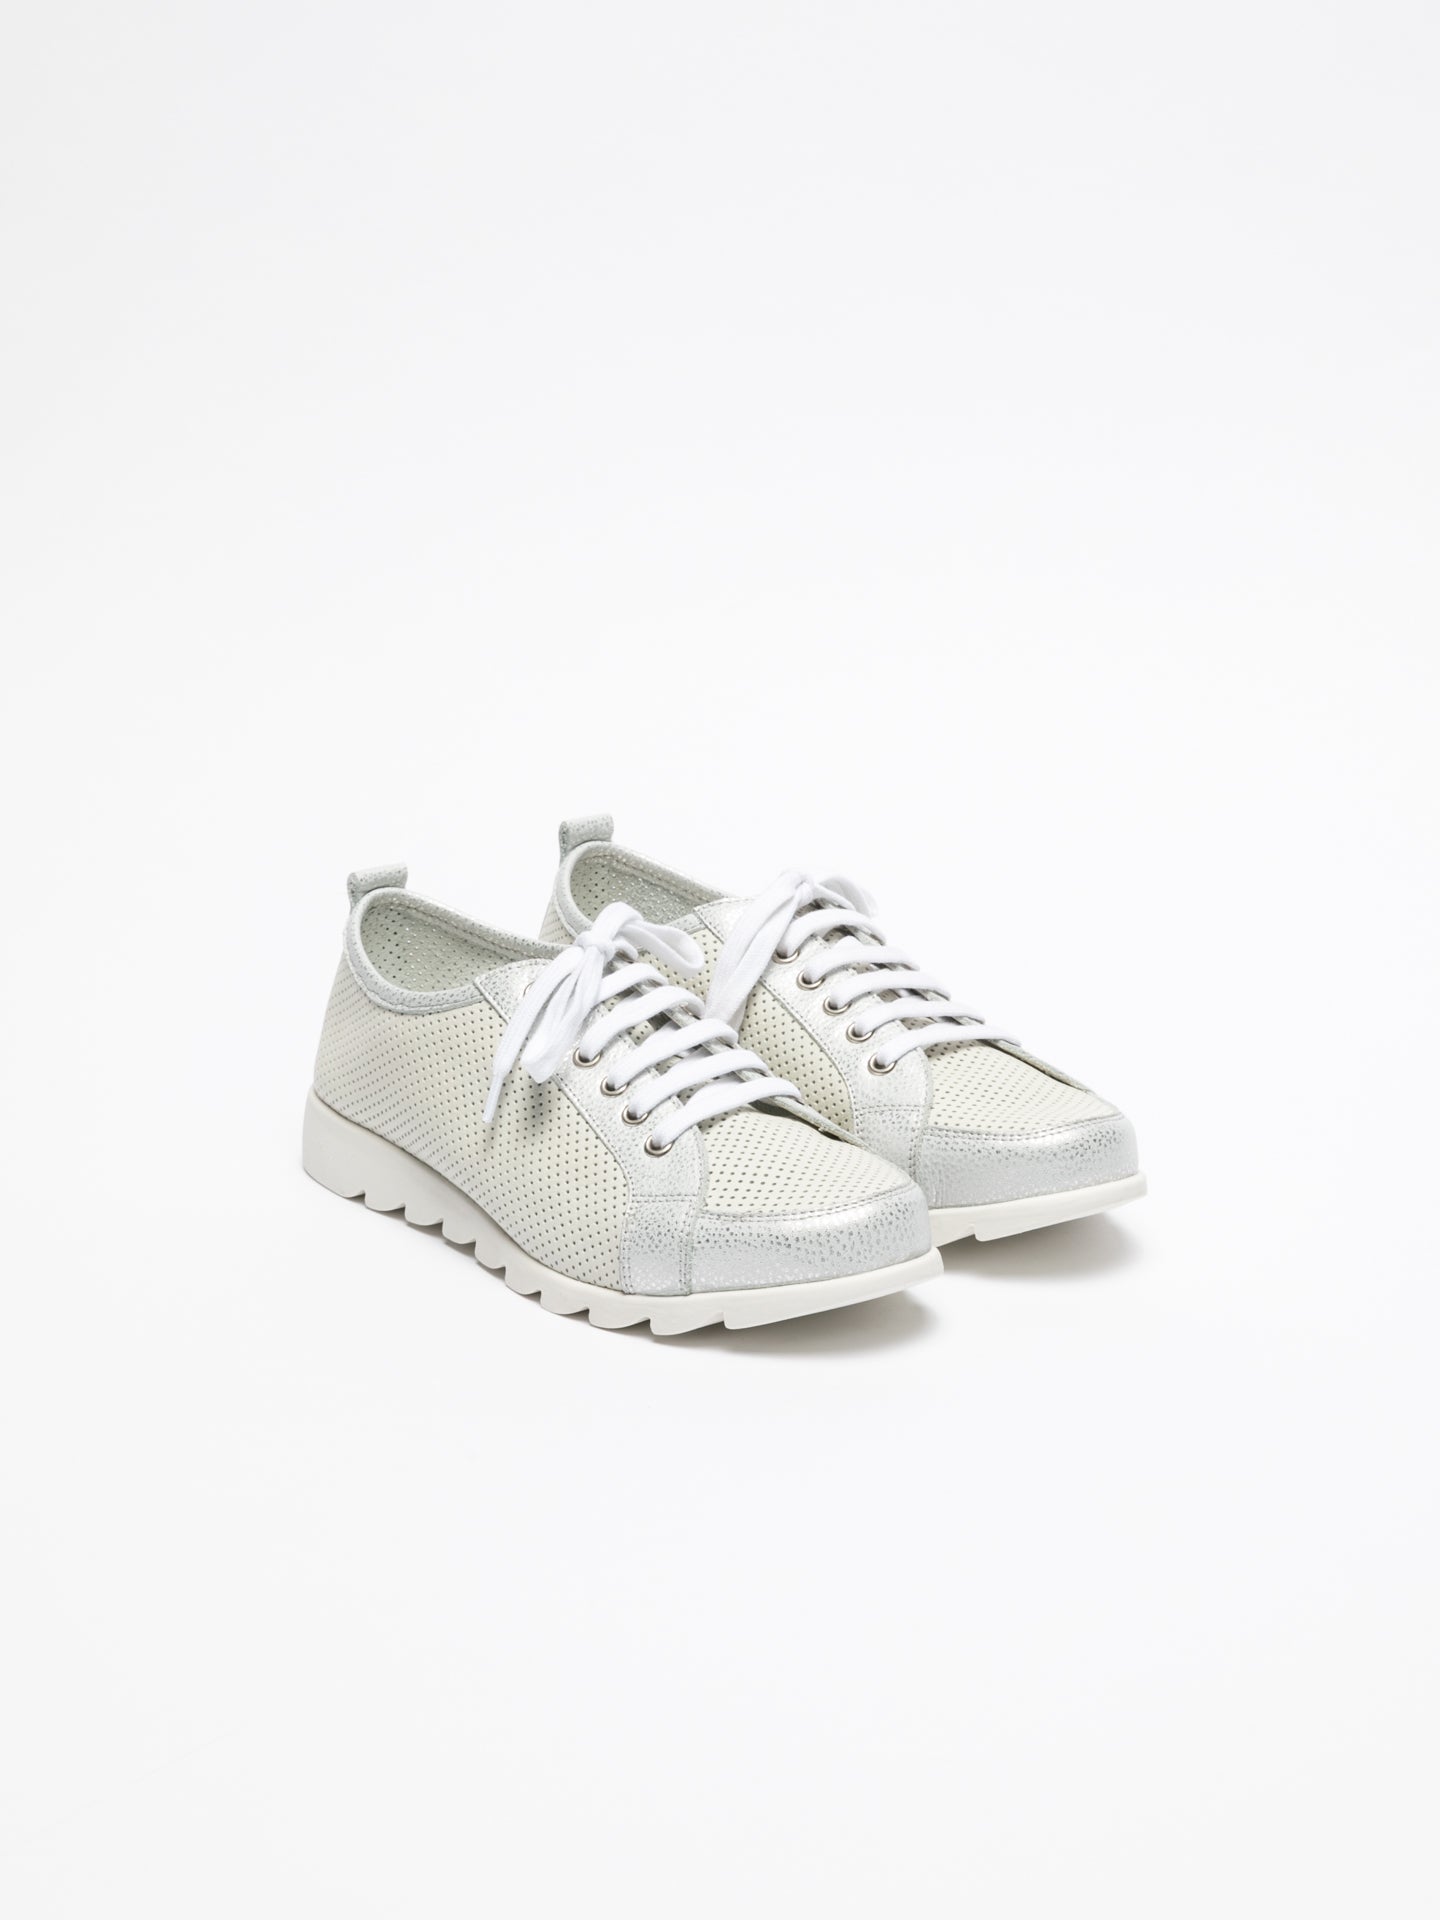 The Flexx Silver Lace-up Trainers